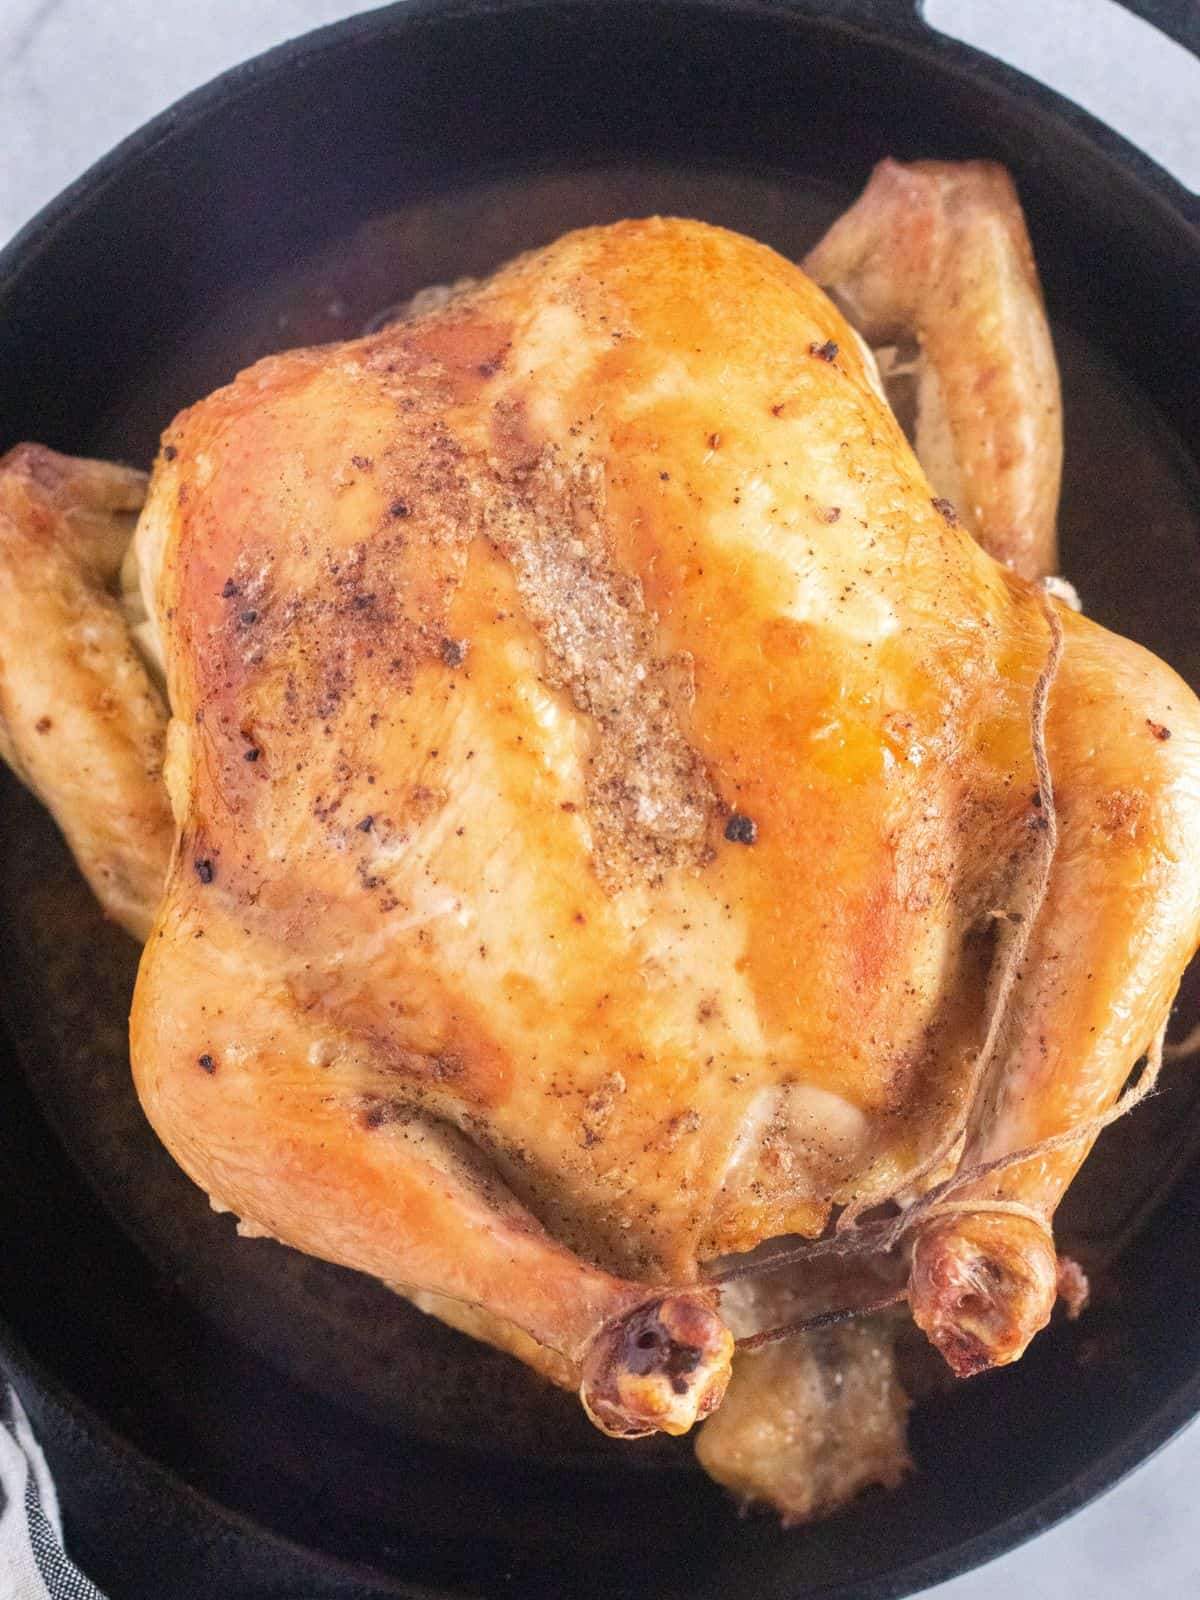 cooked chicken in cast iron skillet.